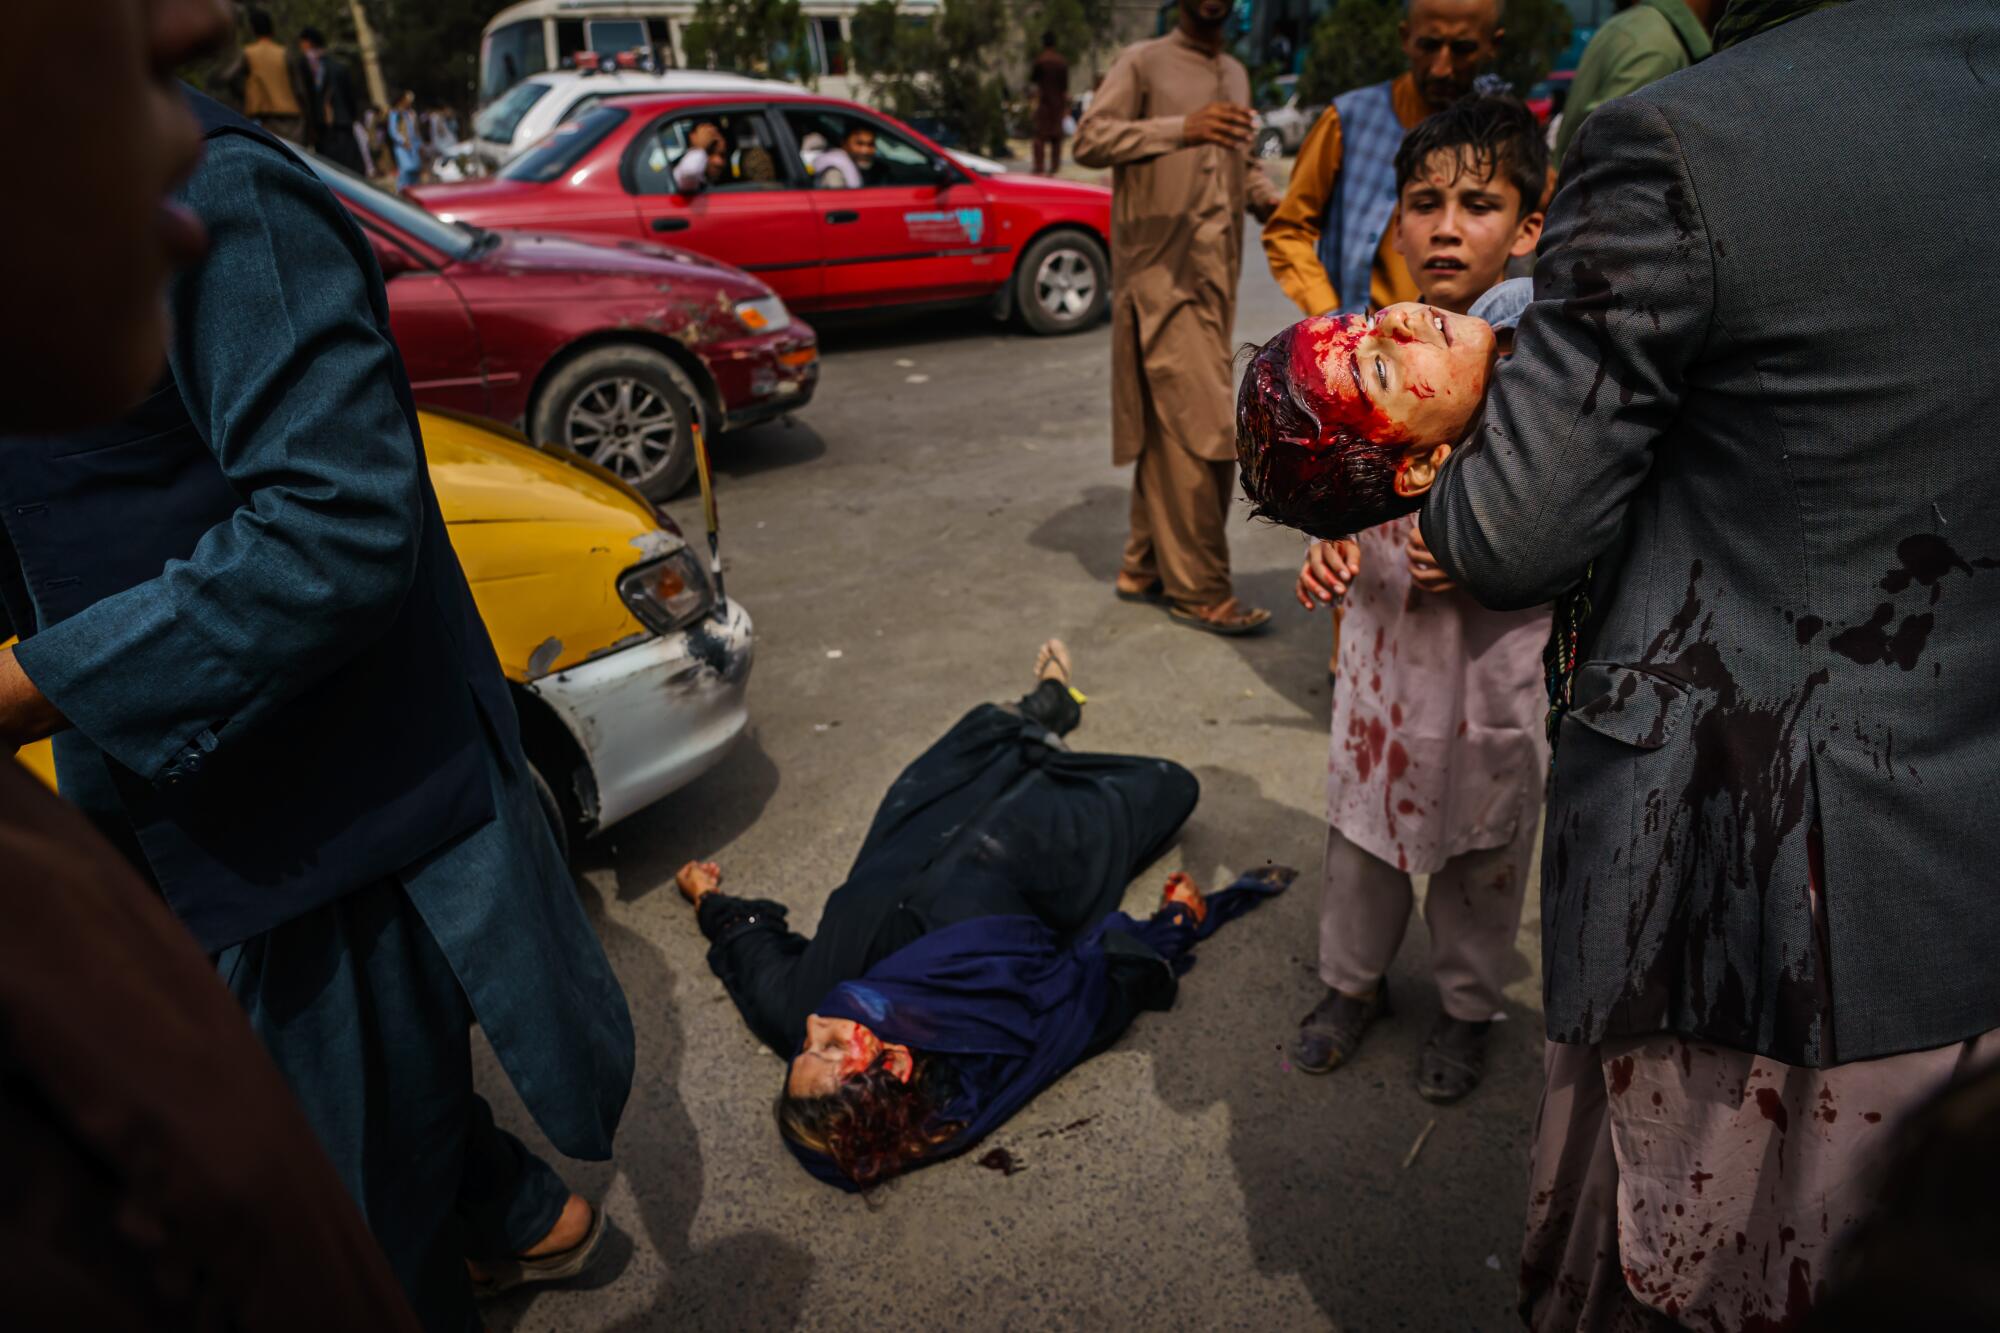 A man carries a bloodied child as a woman lies wounded on the street on Aug. 17, 2021.